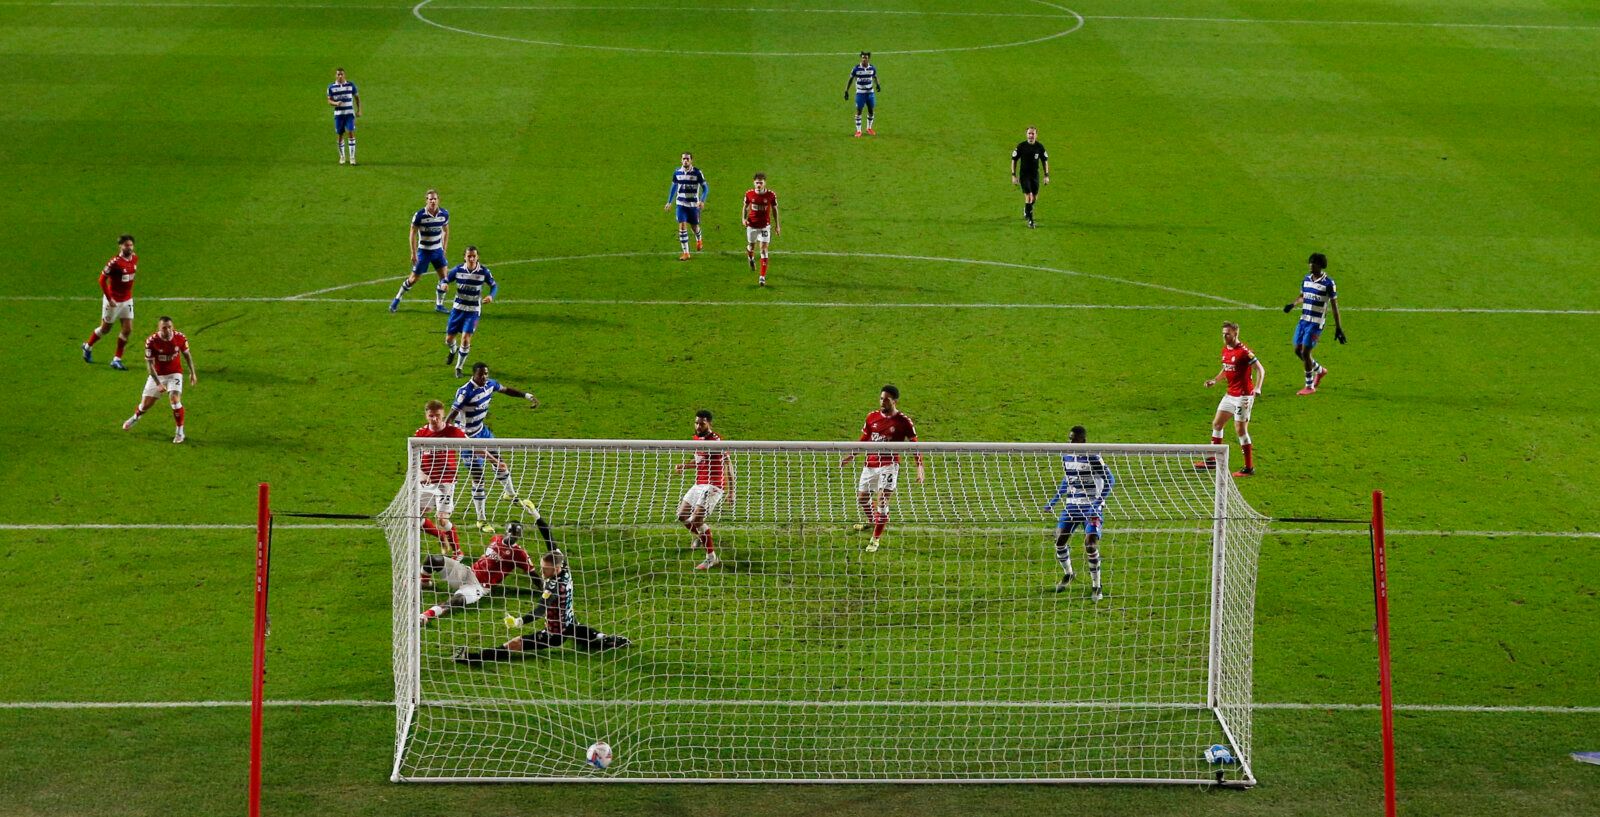 Soccer Football - Championship - Bristol City v Reading - Ashton Gate Stadium, Bristol, Britain - February 16, 2021 Reading’s Lucas Joao scores their first goal Action Images/Andrew Couldridge EDITORIAL USE ONLY. No use with unauthorized audio, video, data, fixture lists, club/league logos or 'live' services. Online in-match use limited to 75 images, no video emulation. No use in betting, games or single club /league/player publications.  Please contact your account representative for further de